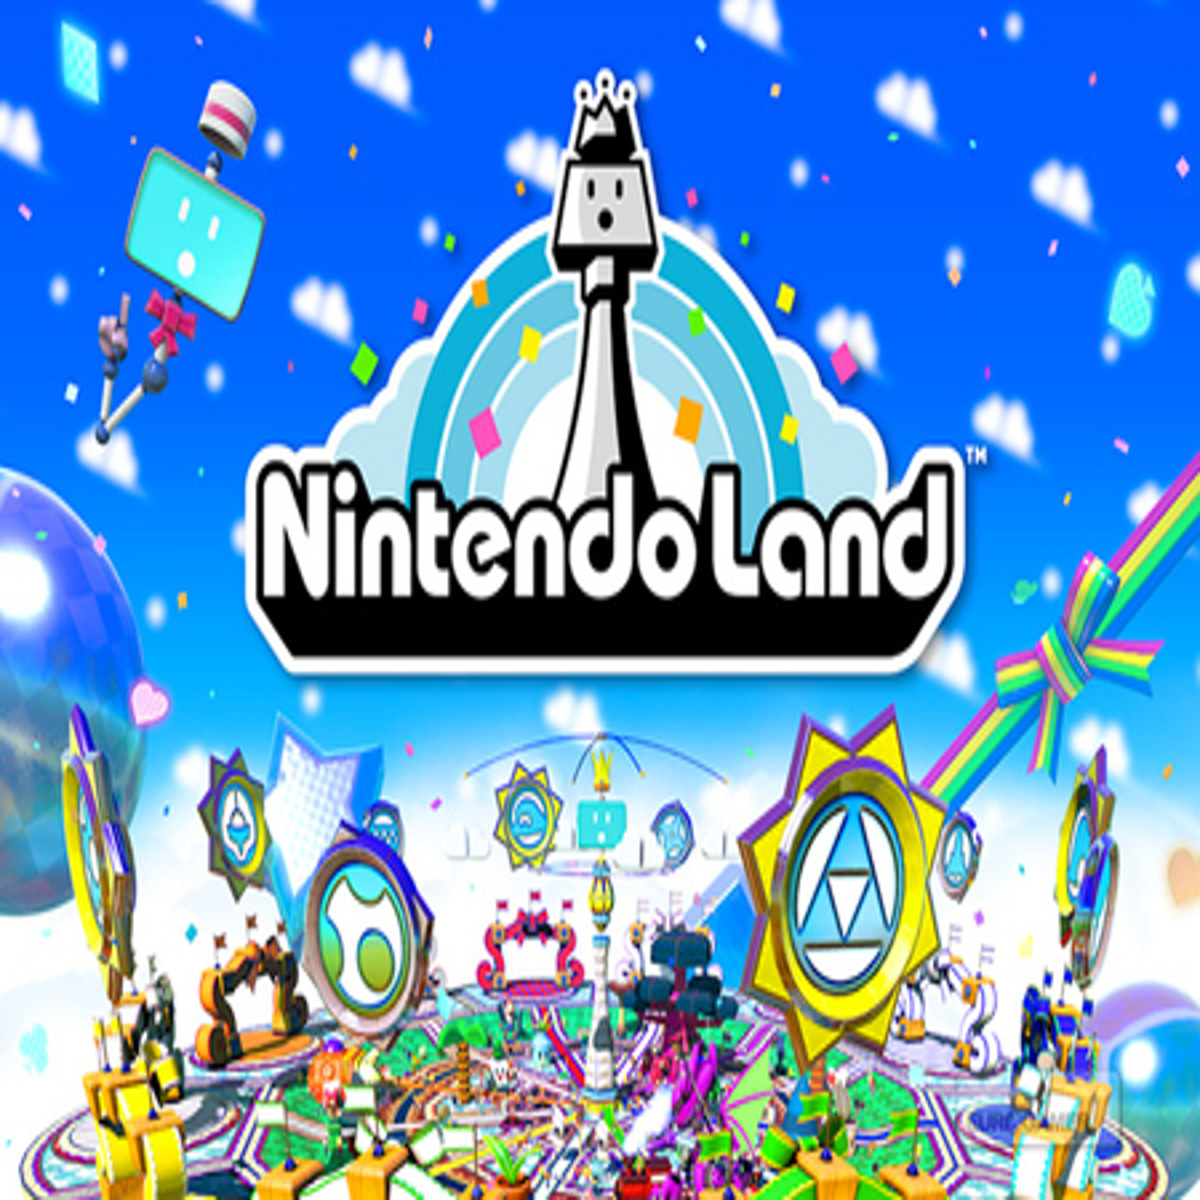 Nintendo Land remains one of the only games to tap the Wii U's